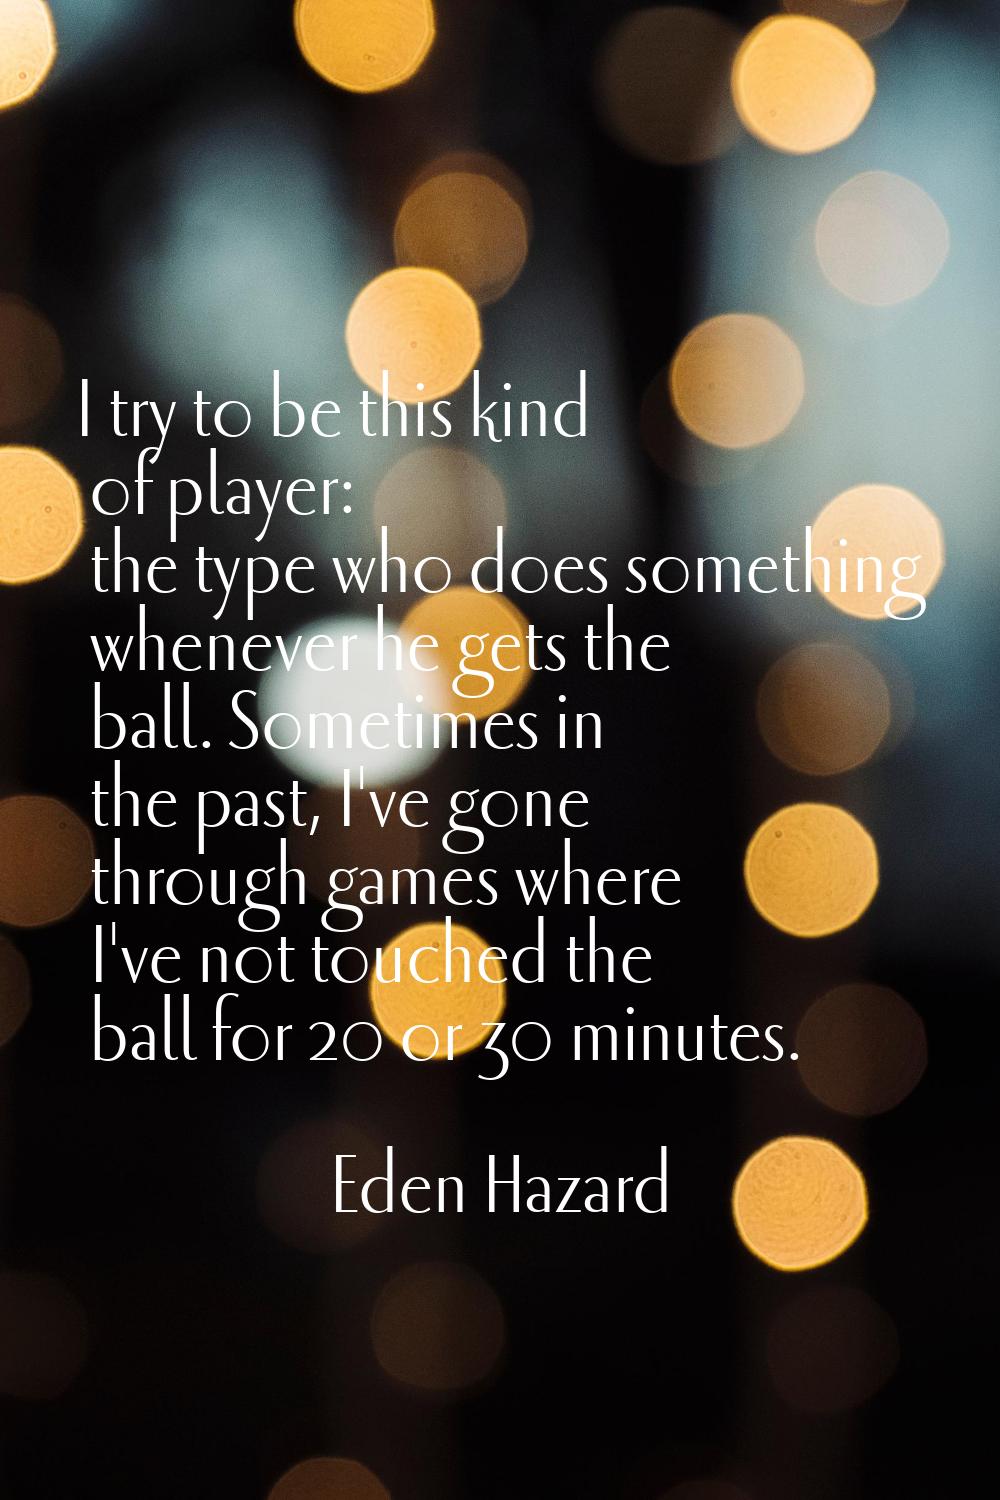 I try to be this kind of player: the type who does something whenever he gets the ball. Sometimes i